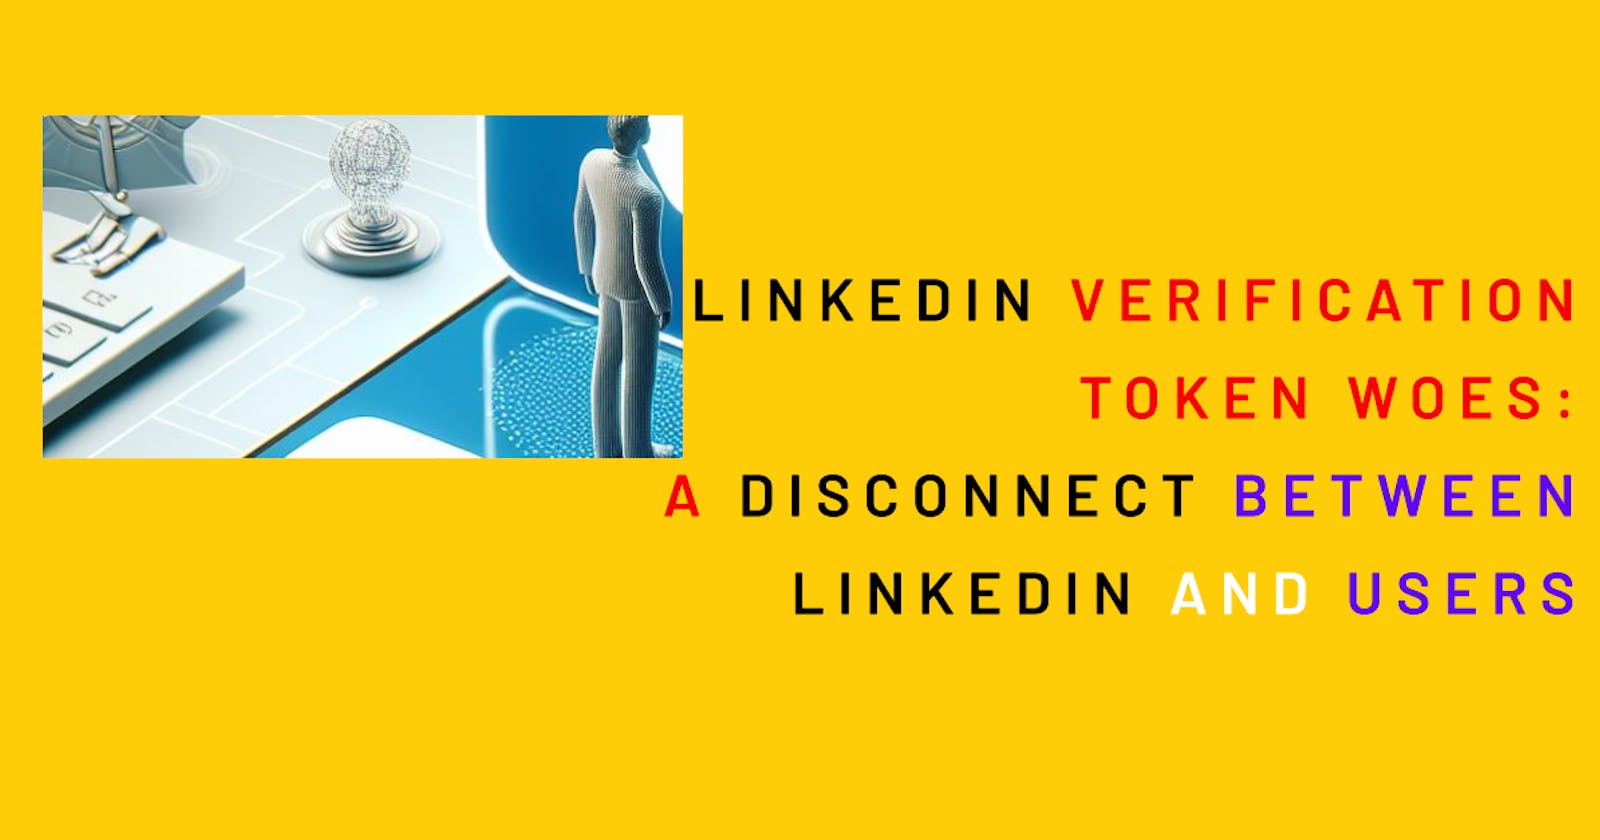 My Personal Experience with  LinkedIn Verification Token Woes: A Glaring Disconnect Between LinkedIn and Users